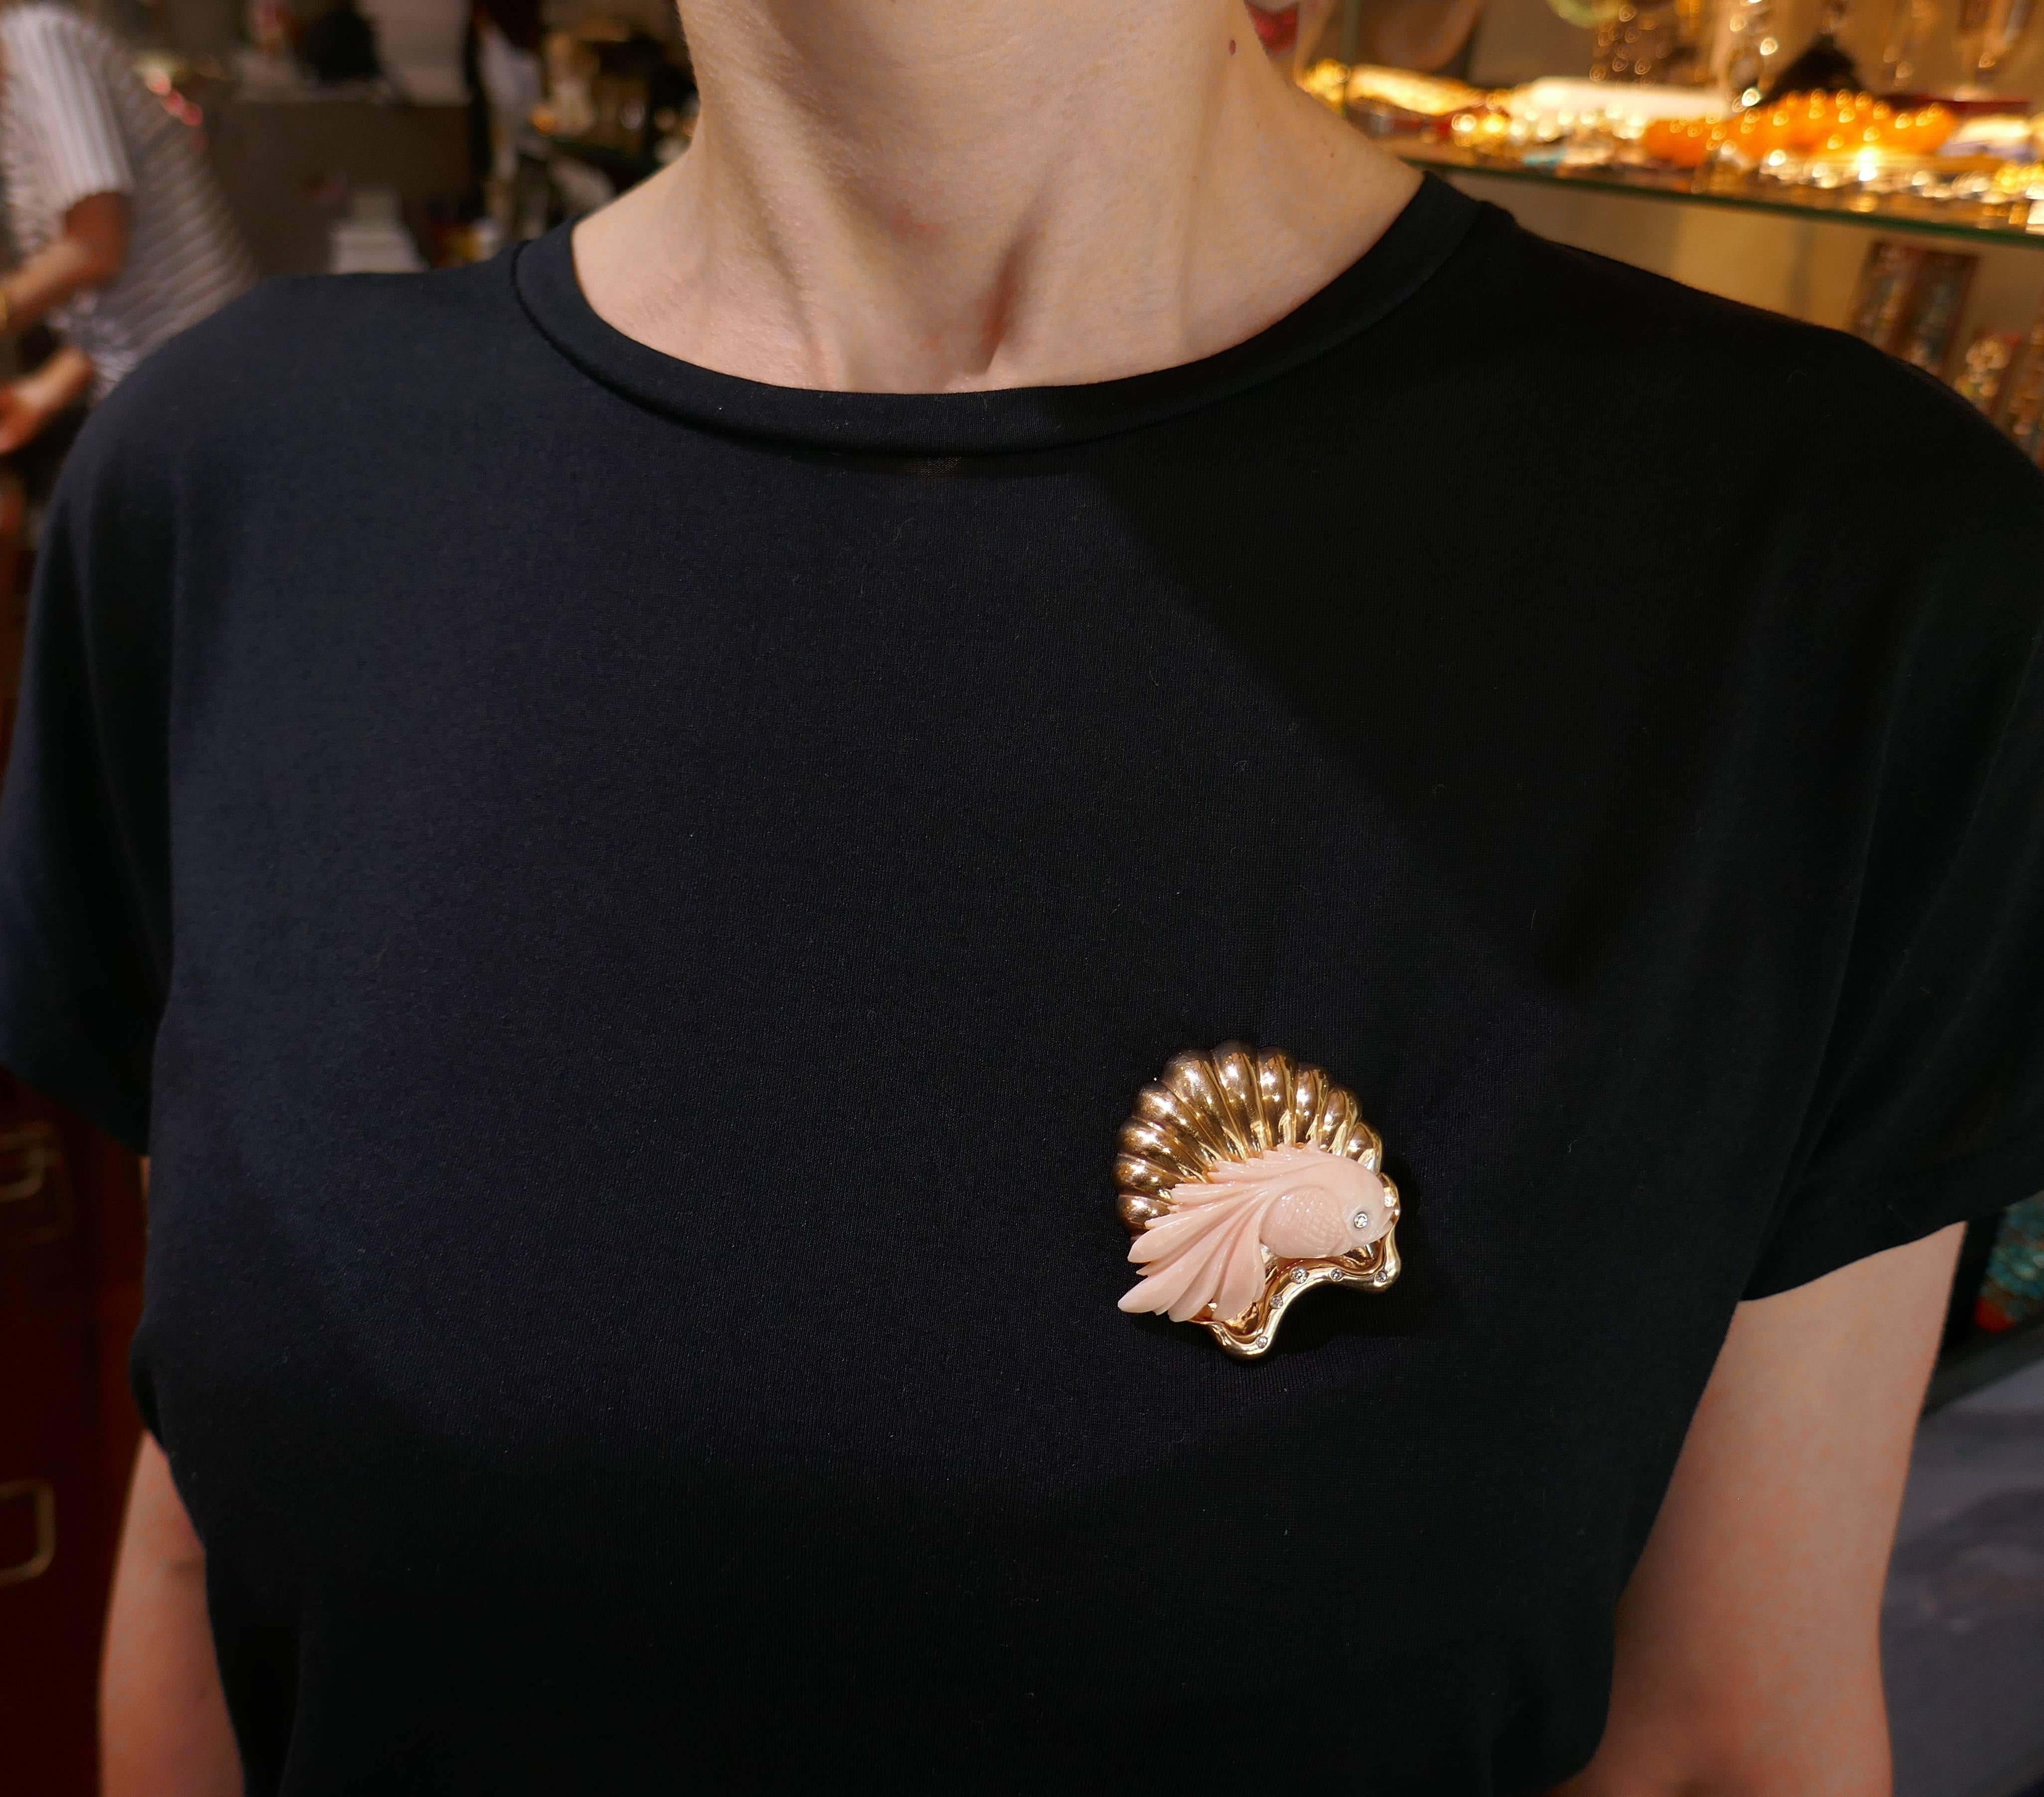 Lovely sea-world brooch created by Seaman Schepps in the 1950s. Feminine and wearable, the clip is a great addition to your jewelry collection.
It is made of 18 karat yellow gold and features a beautiful carved coral fish accented with single and